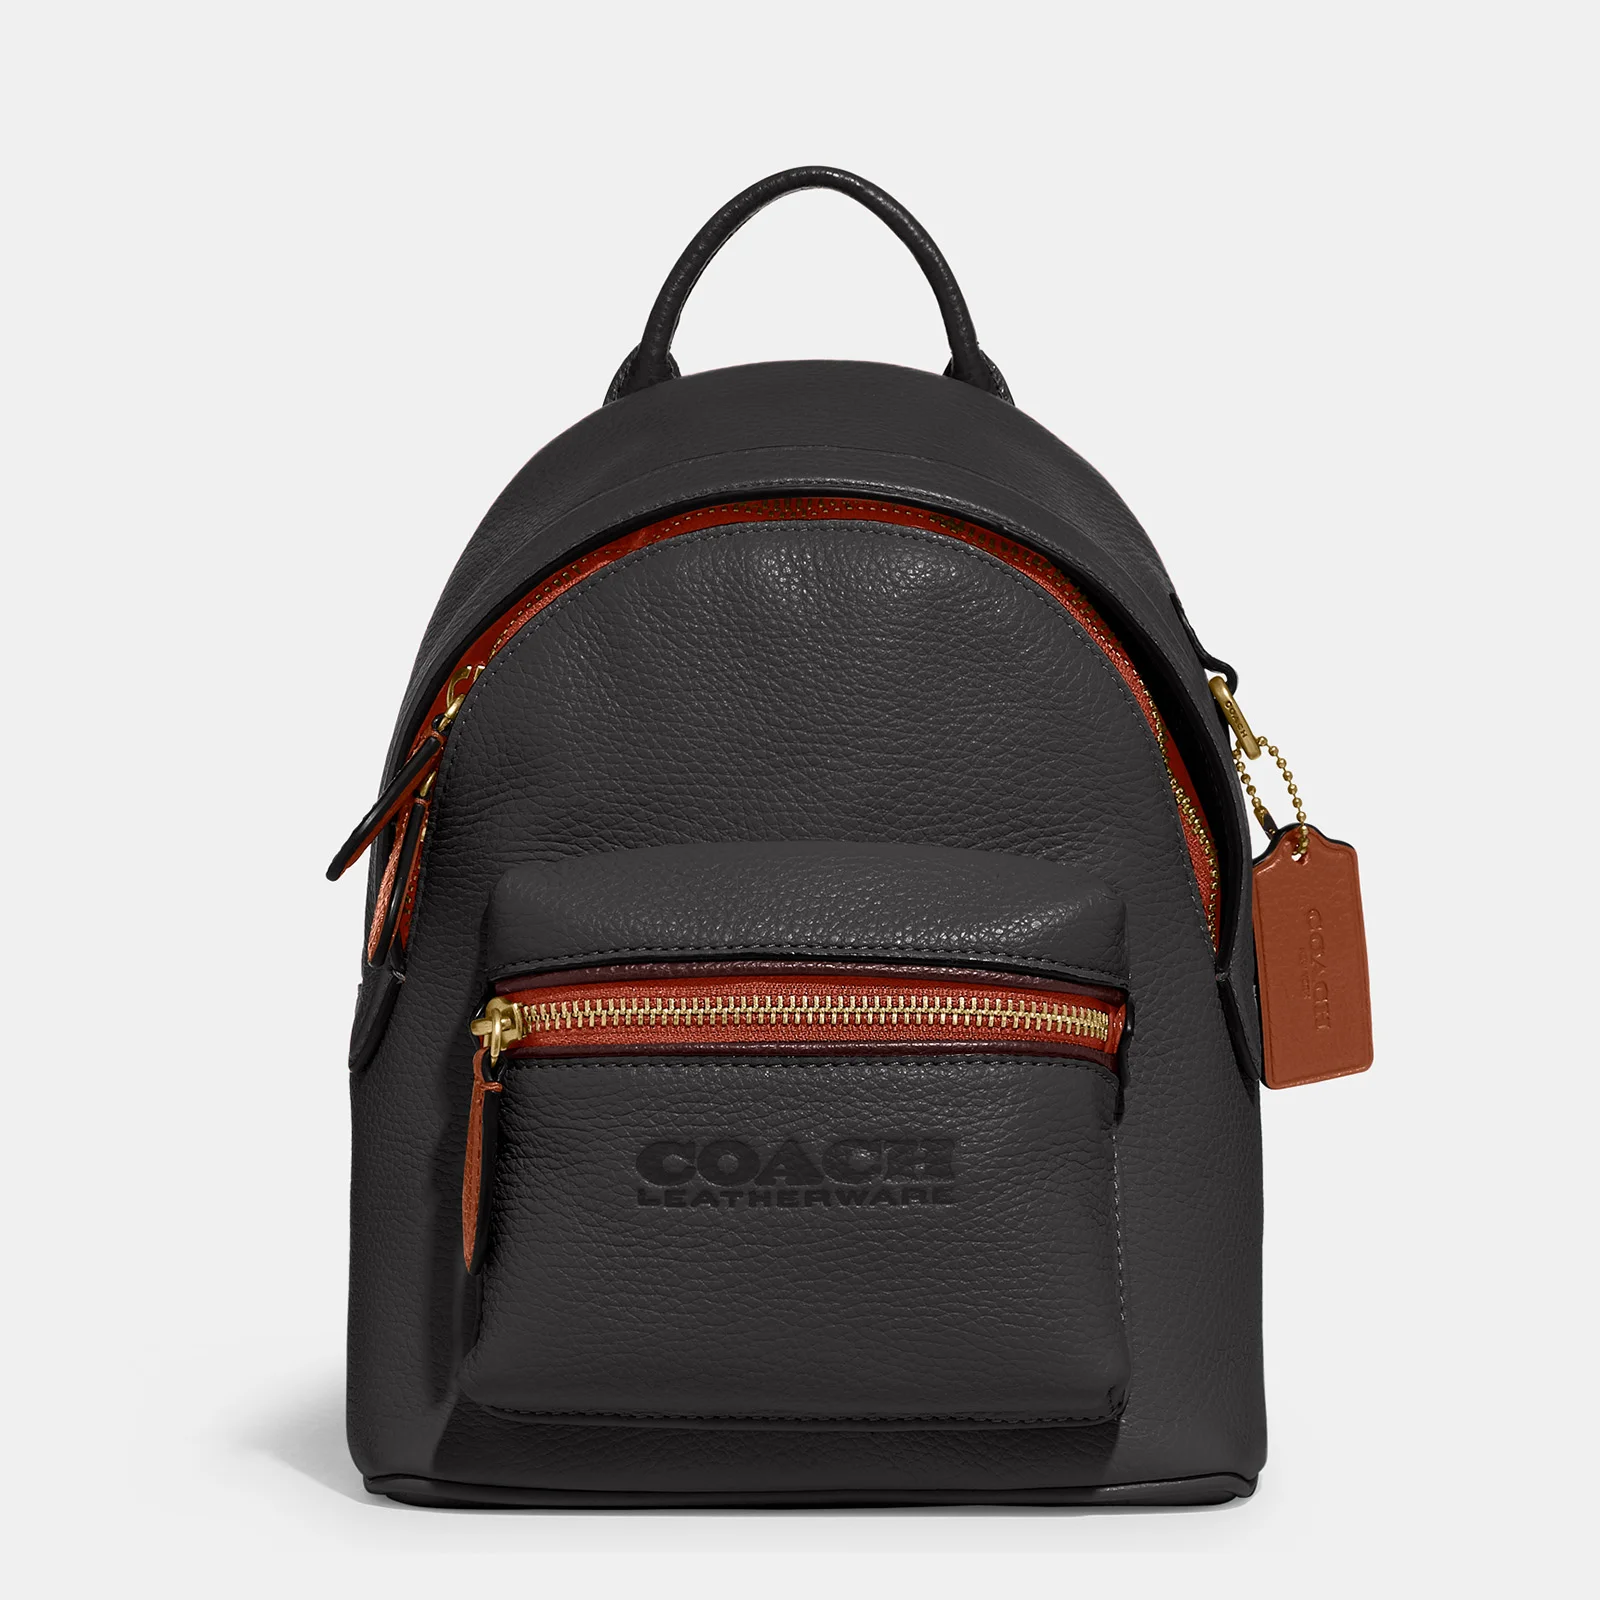 Coach Women's Colorblock Leather Charter Backpack - Black multi Image 1